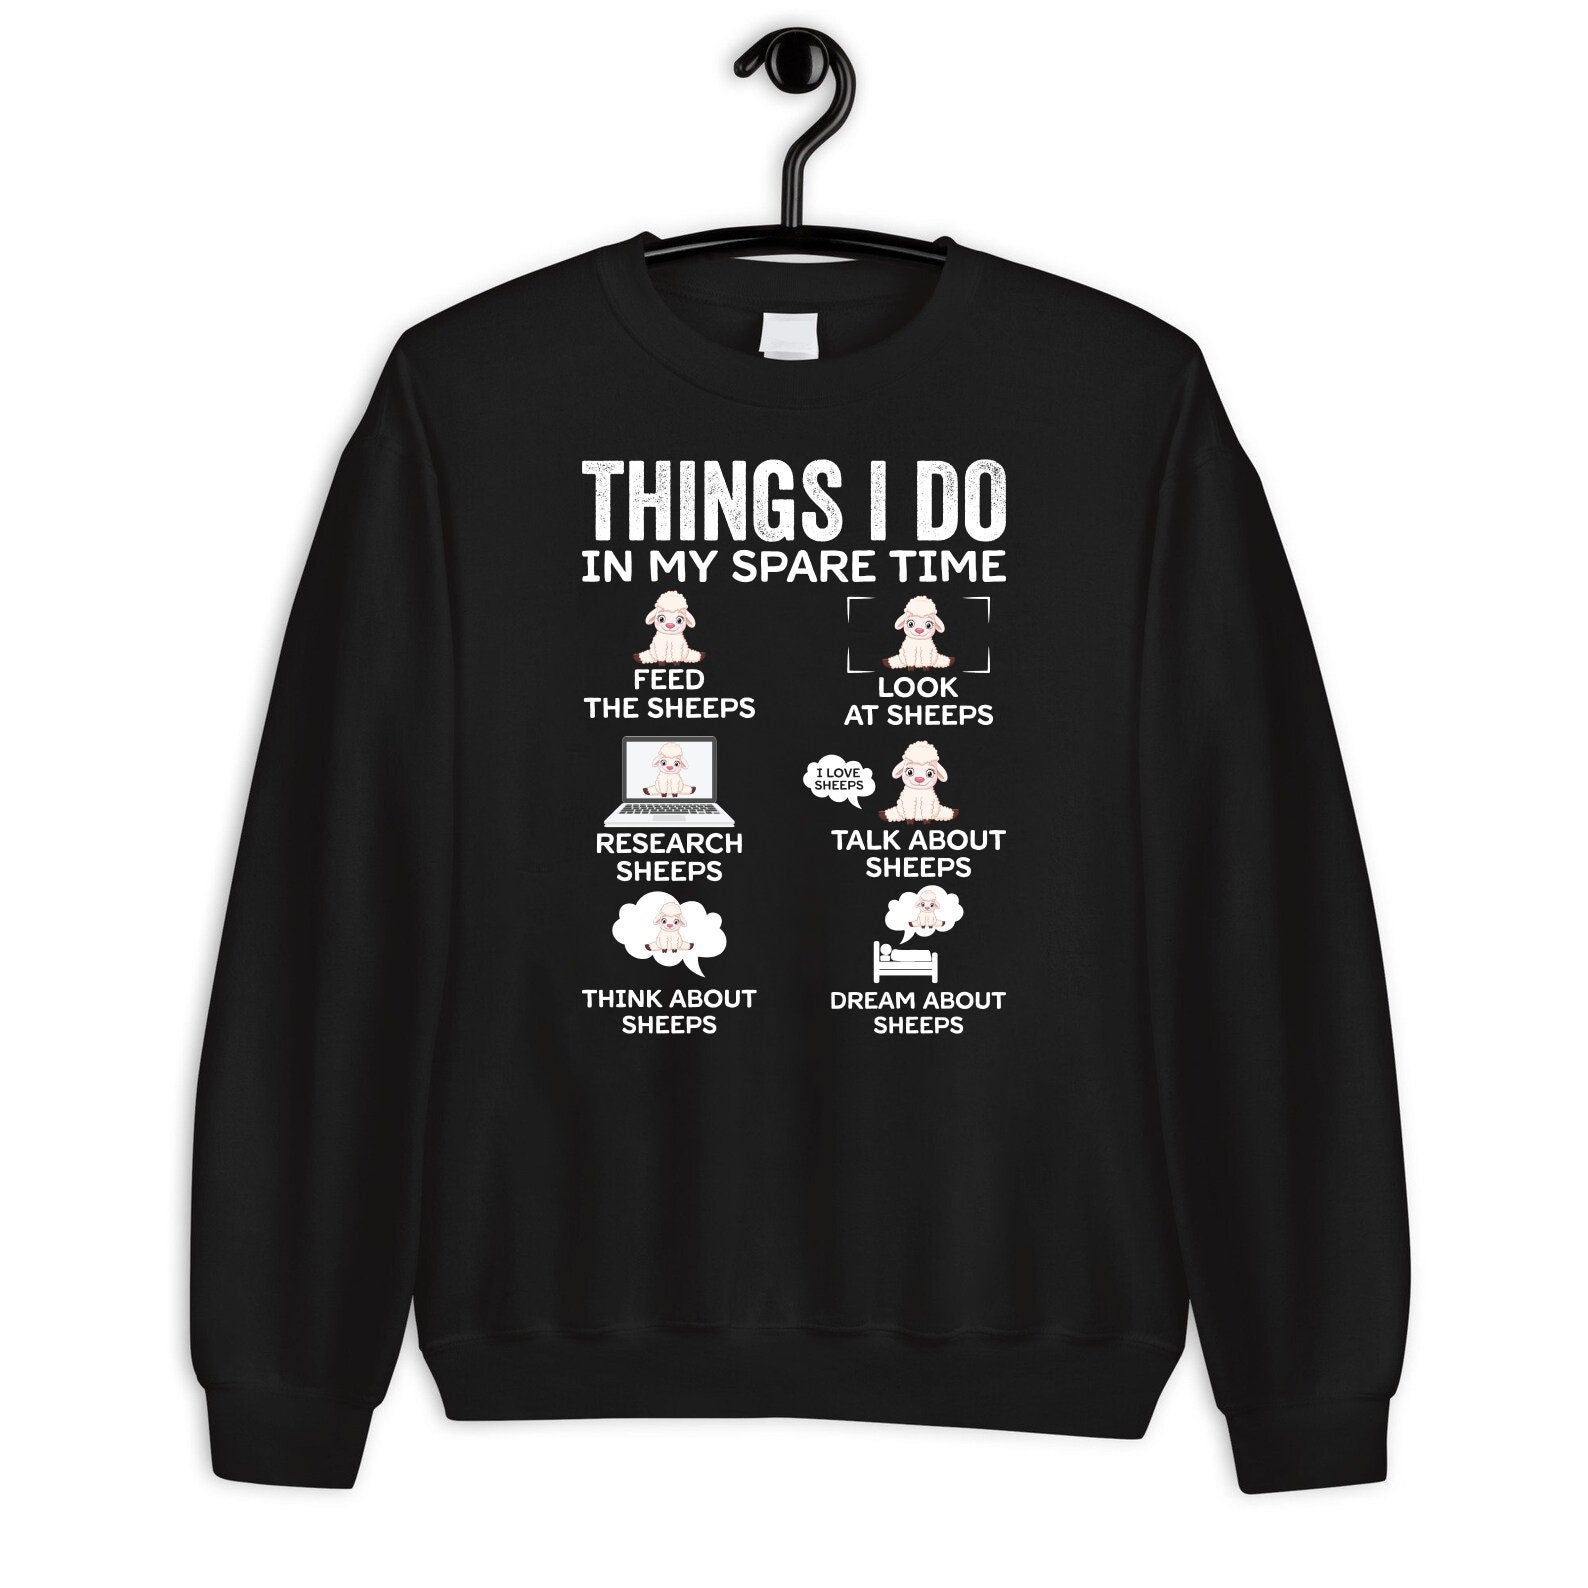 Things I Do In My Spare Time Shirt, Funny Sheep Shirt, Sheep Owner Shirt, Sheep Farmer Shirt